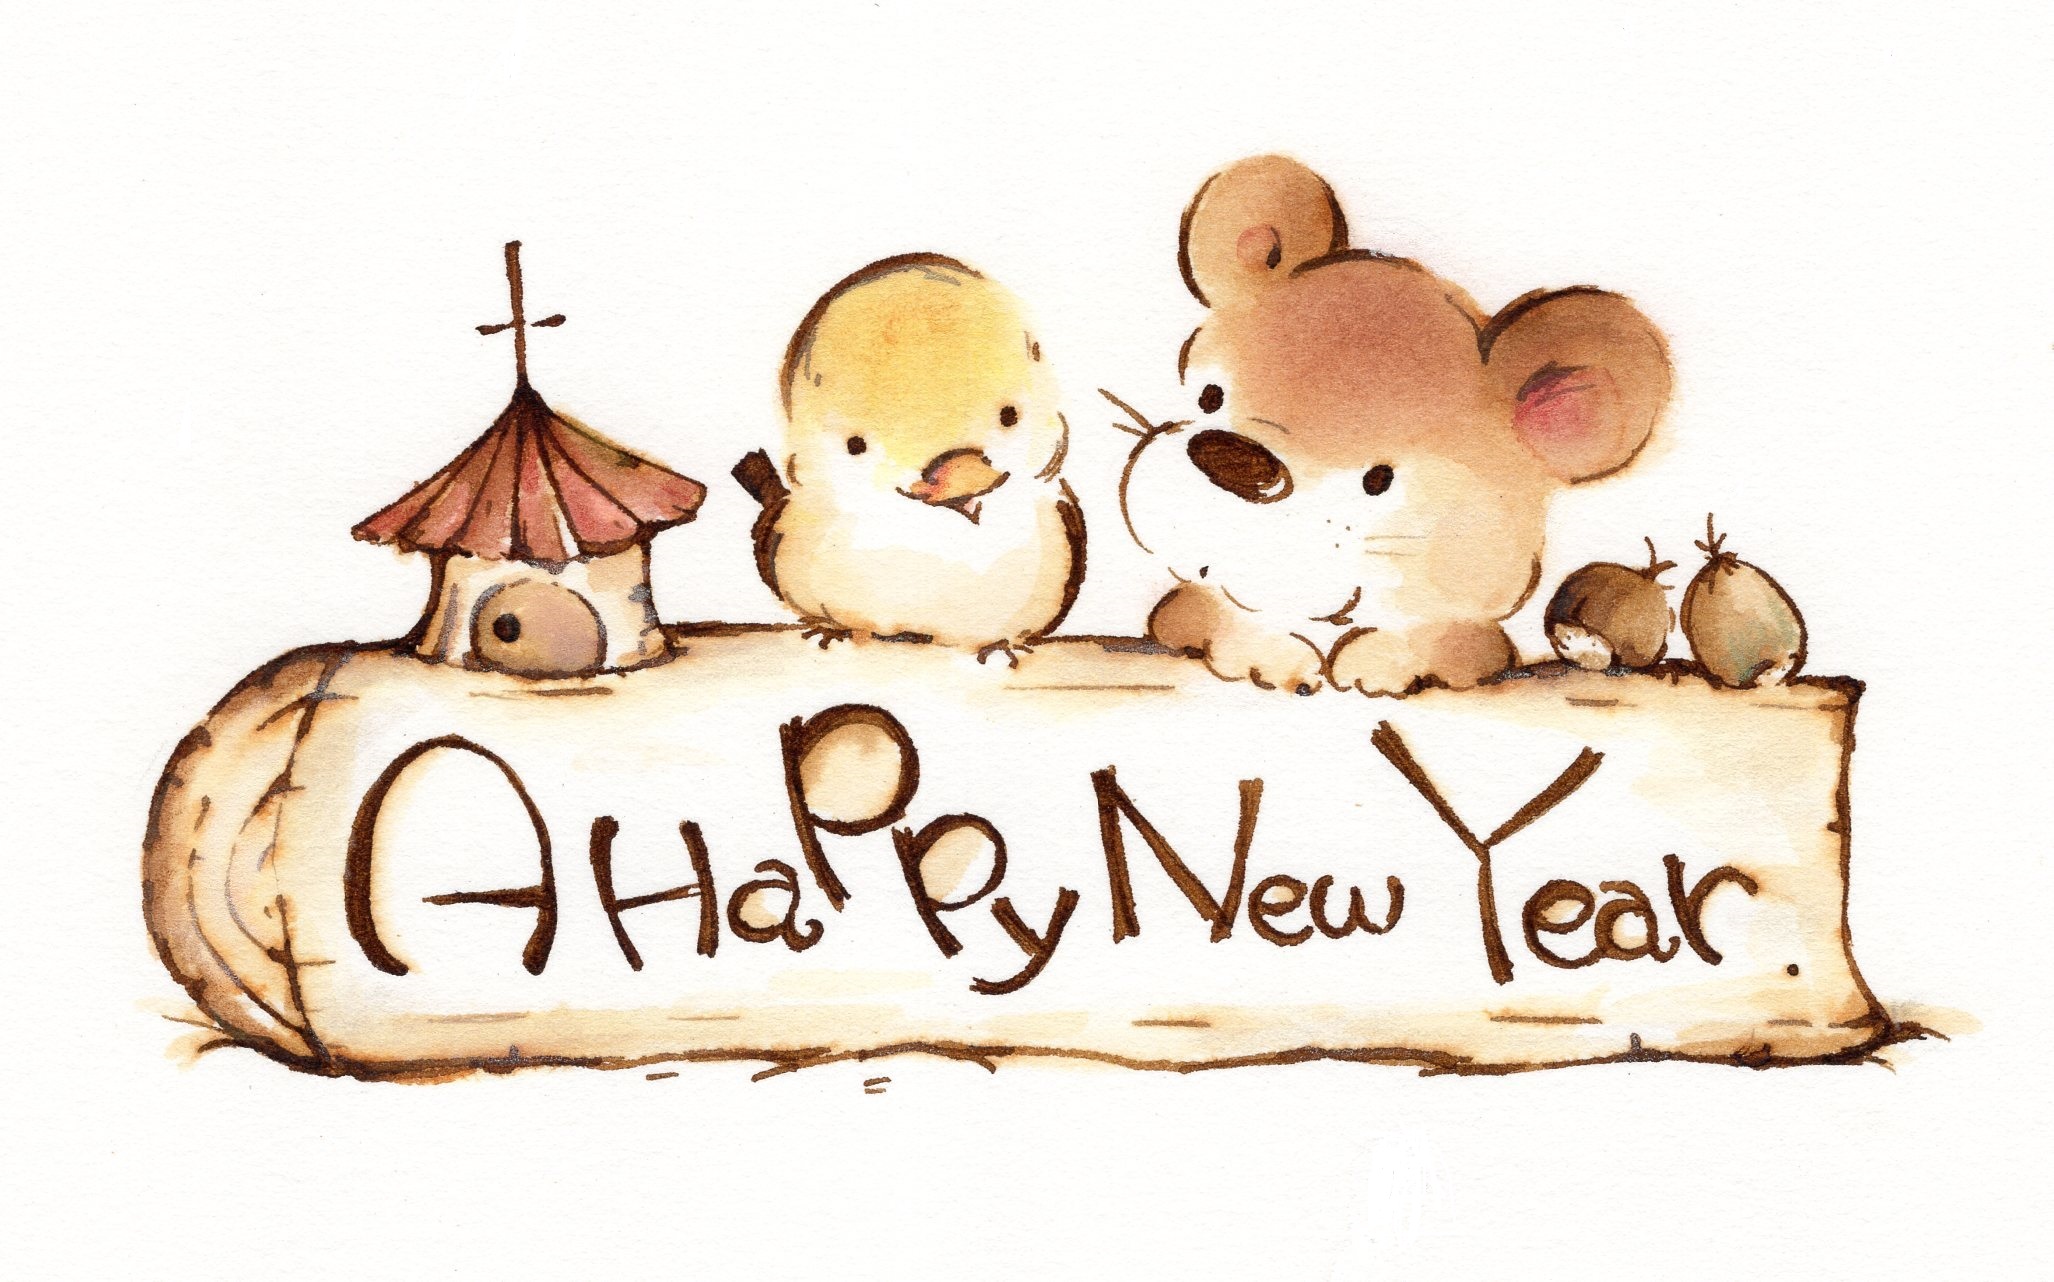 A happy new year.